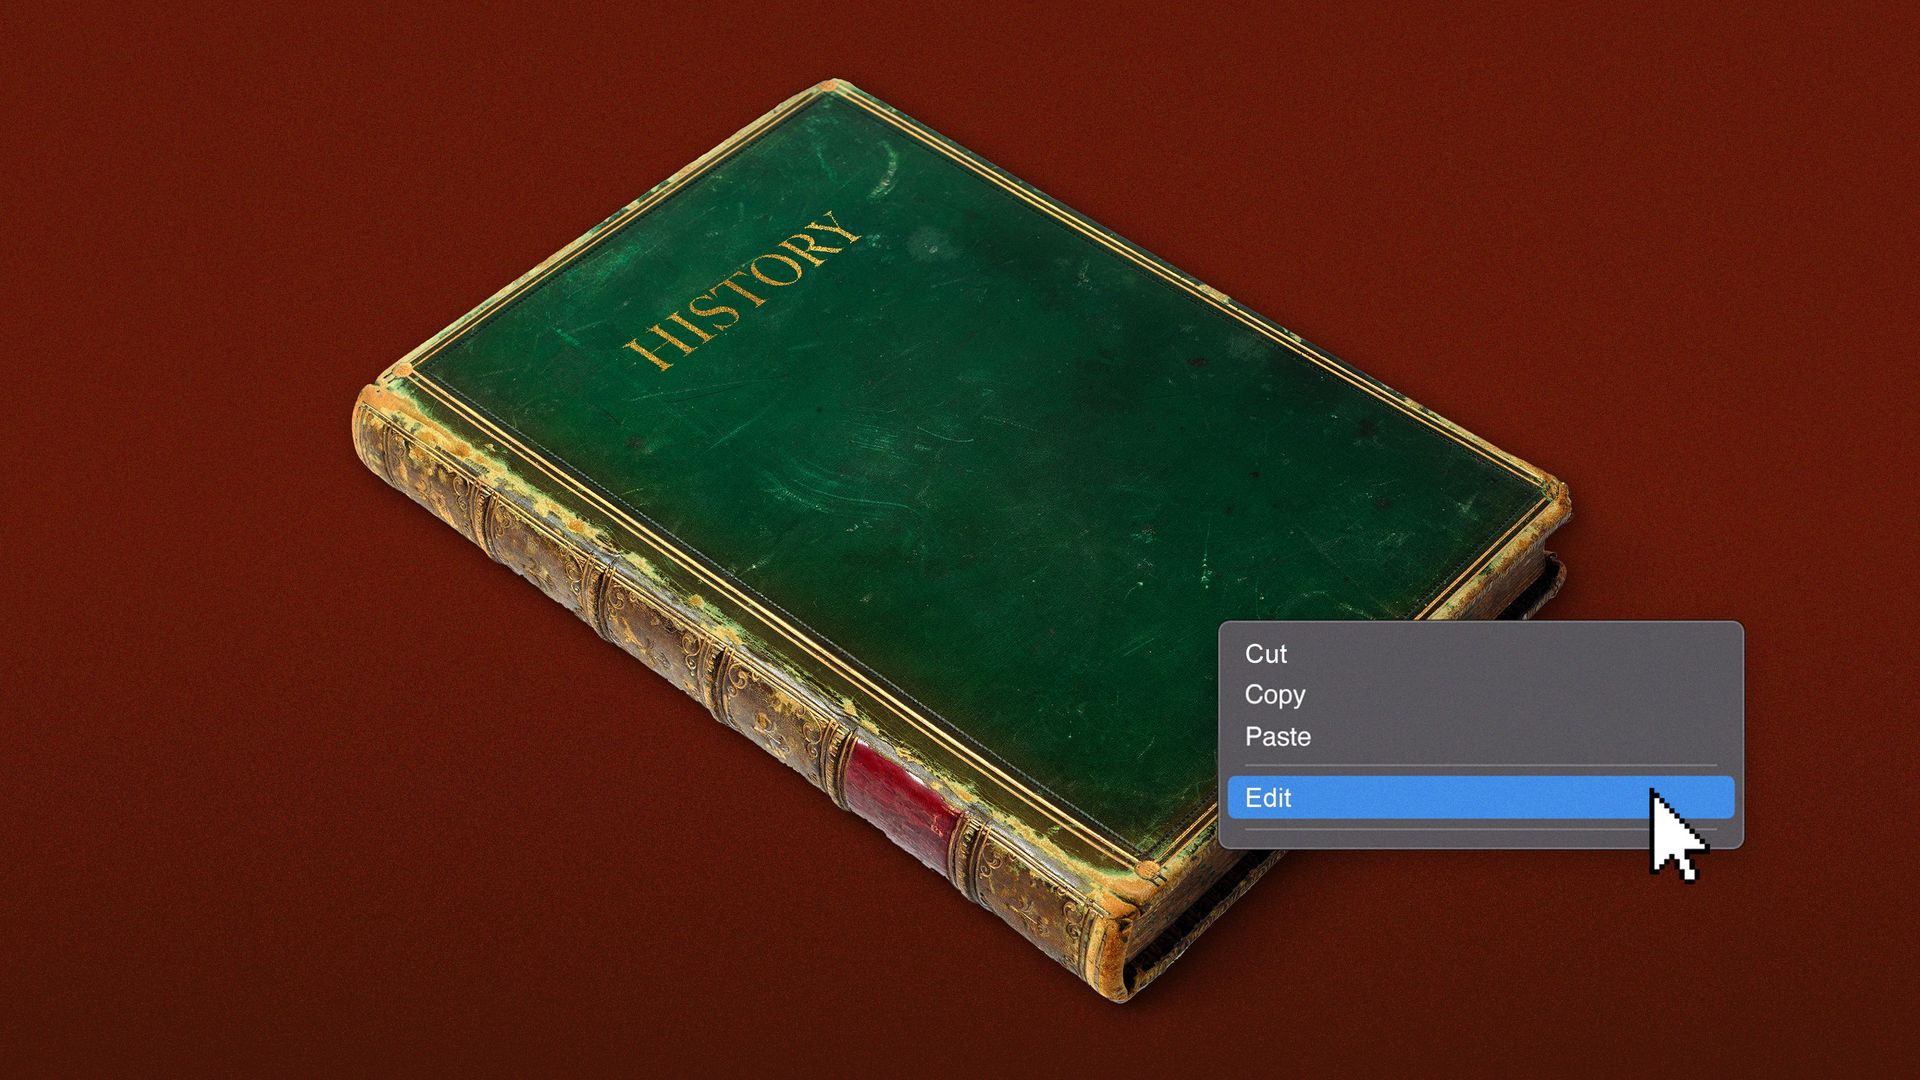 Illustration of a cursor hovering over a history book, about to click "Edit" from a drop down menu.